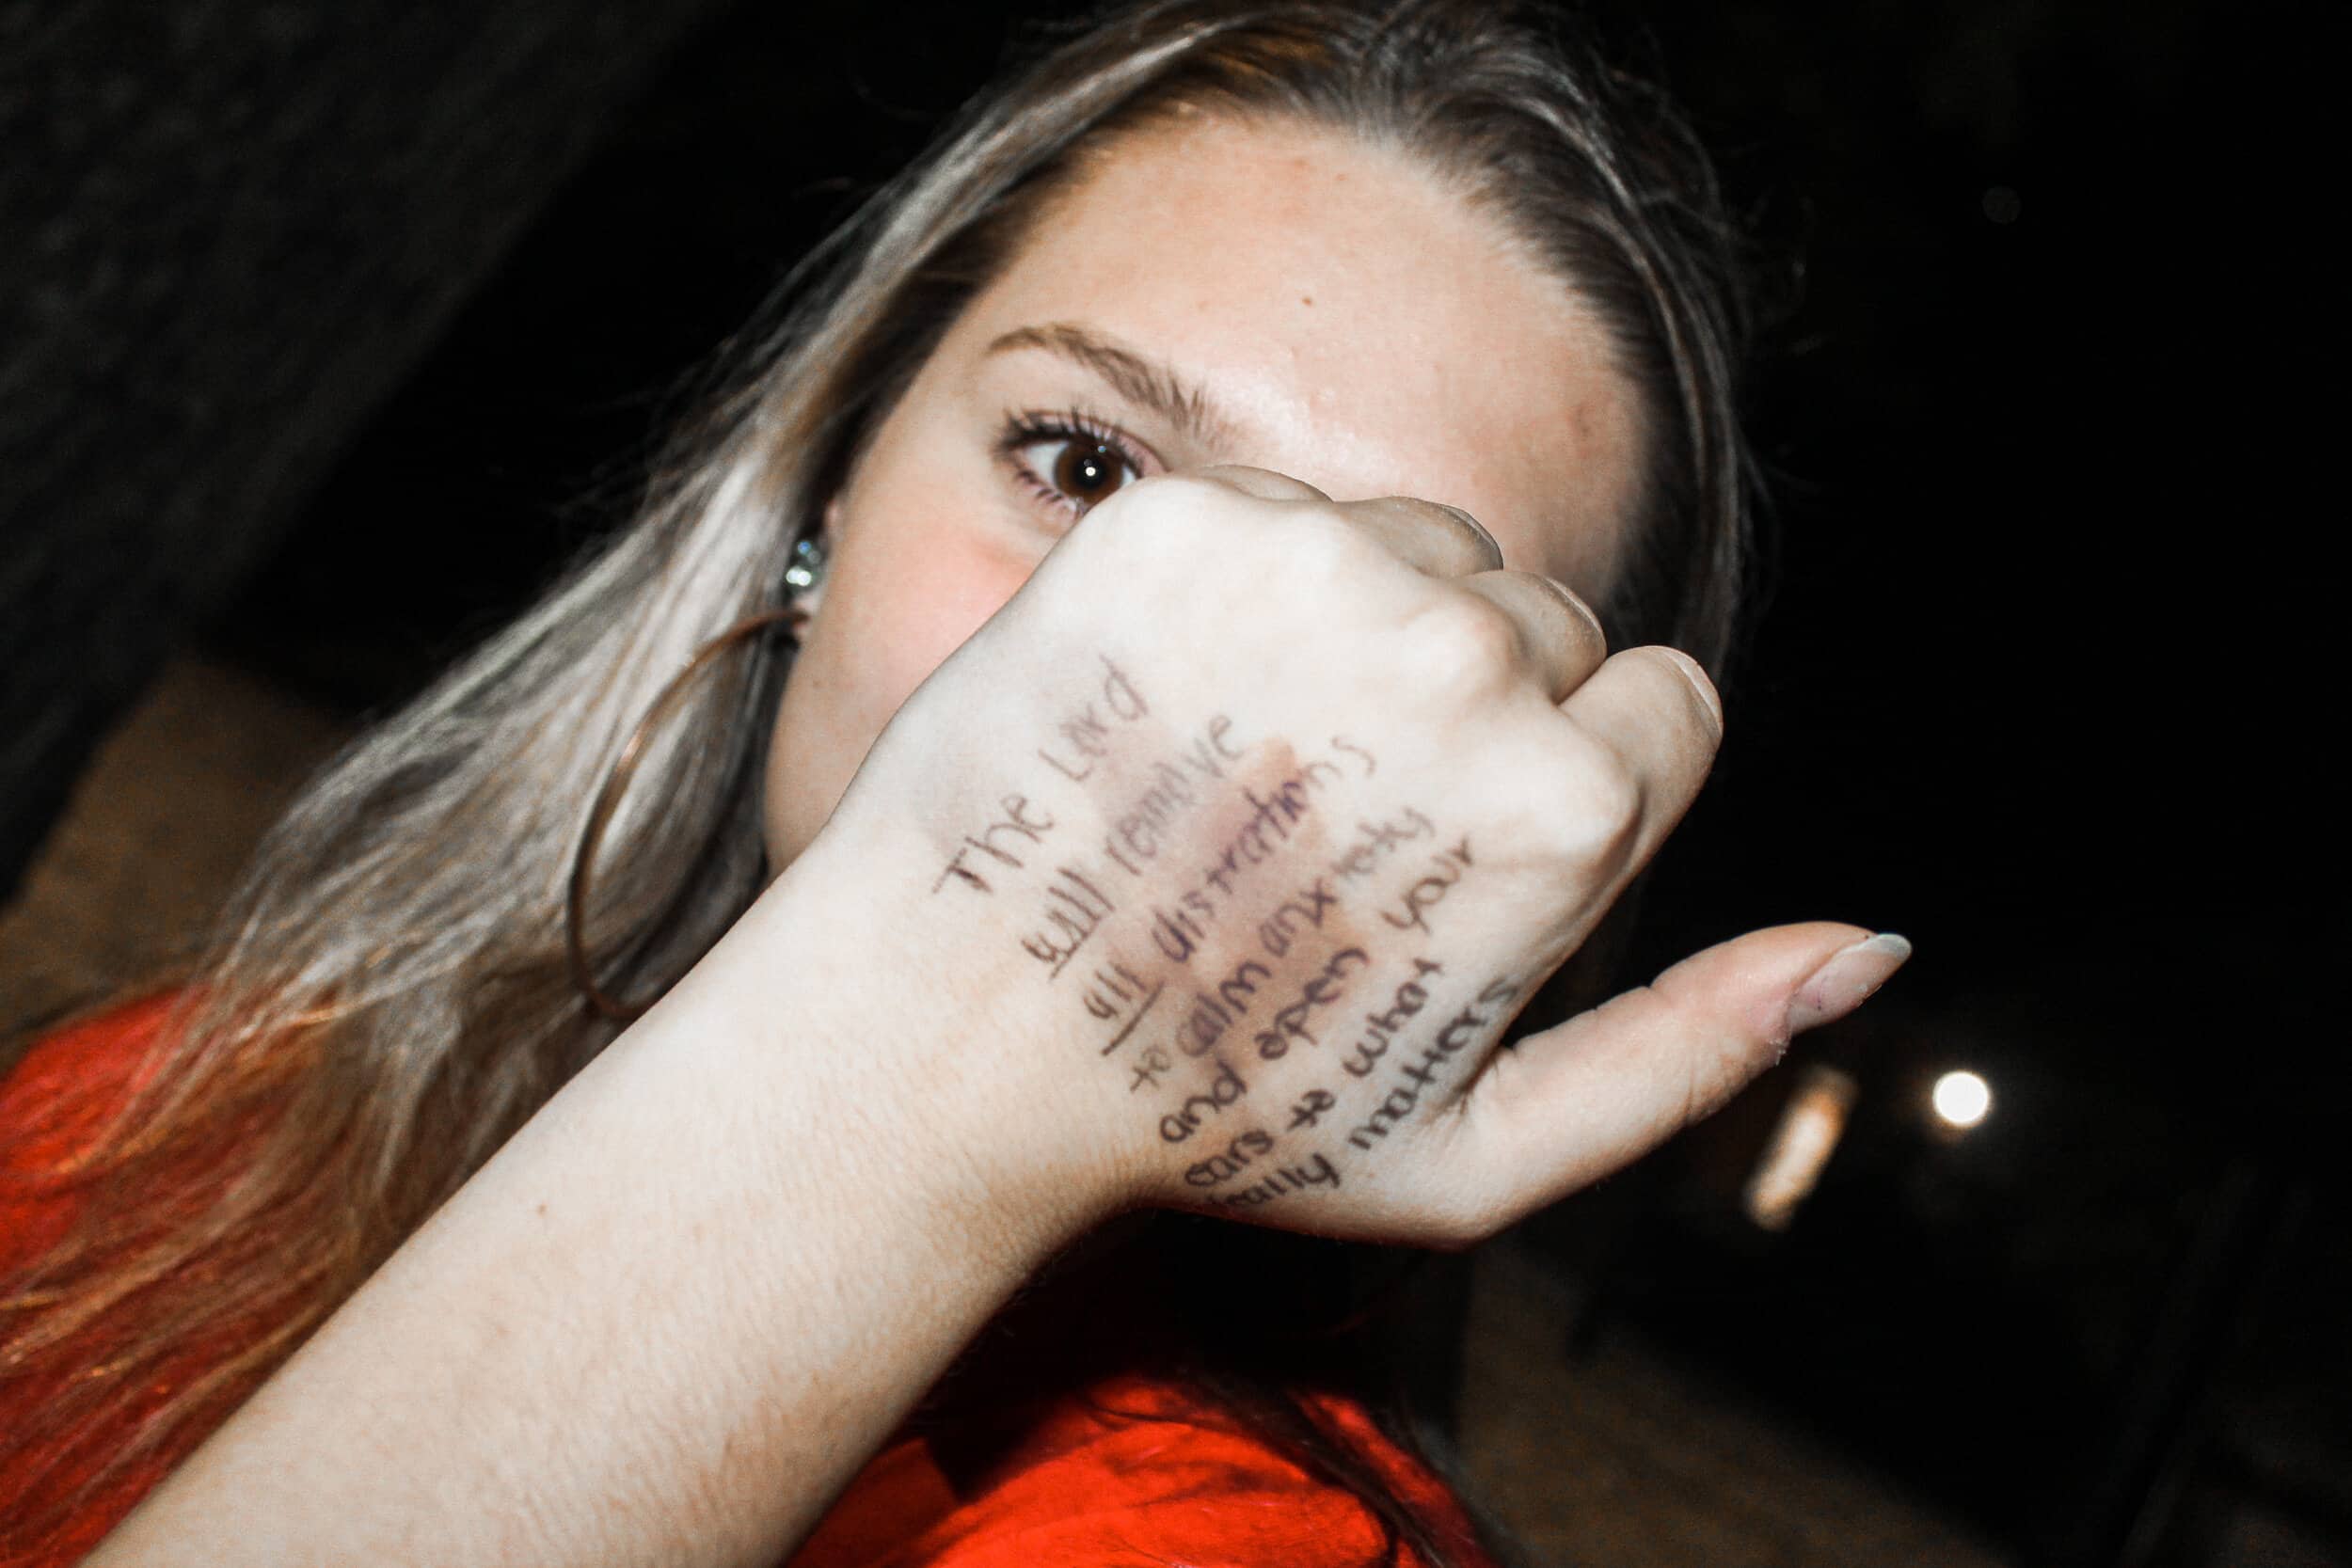 Freshman Maddie Barber showing a Bible verse from BCM on her hand.